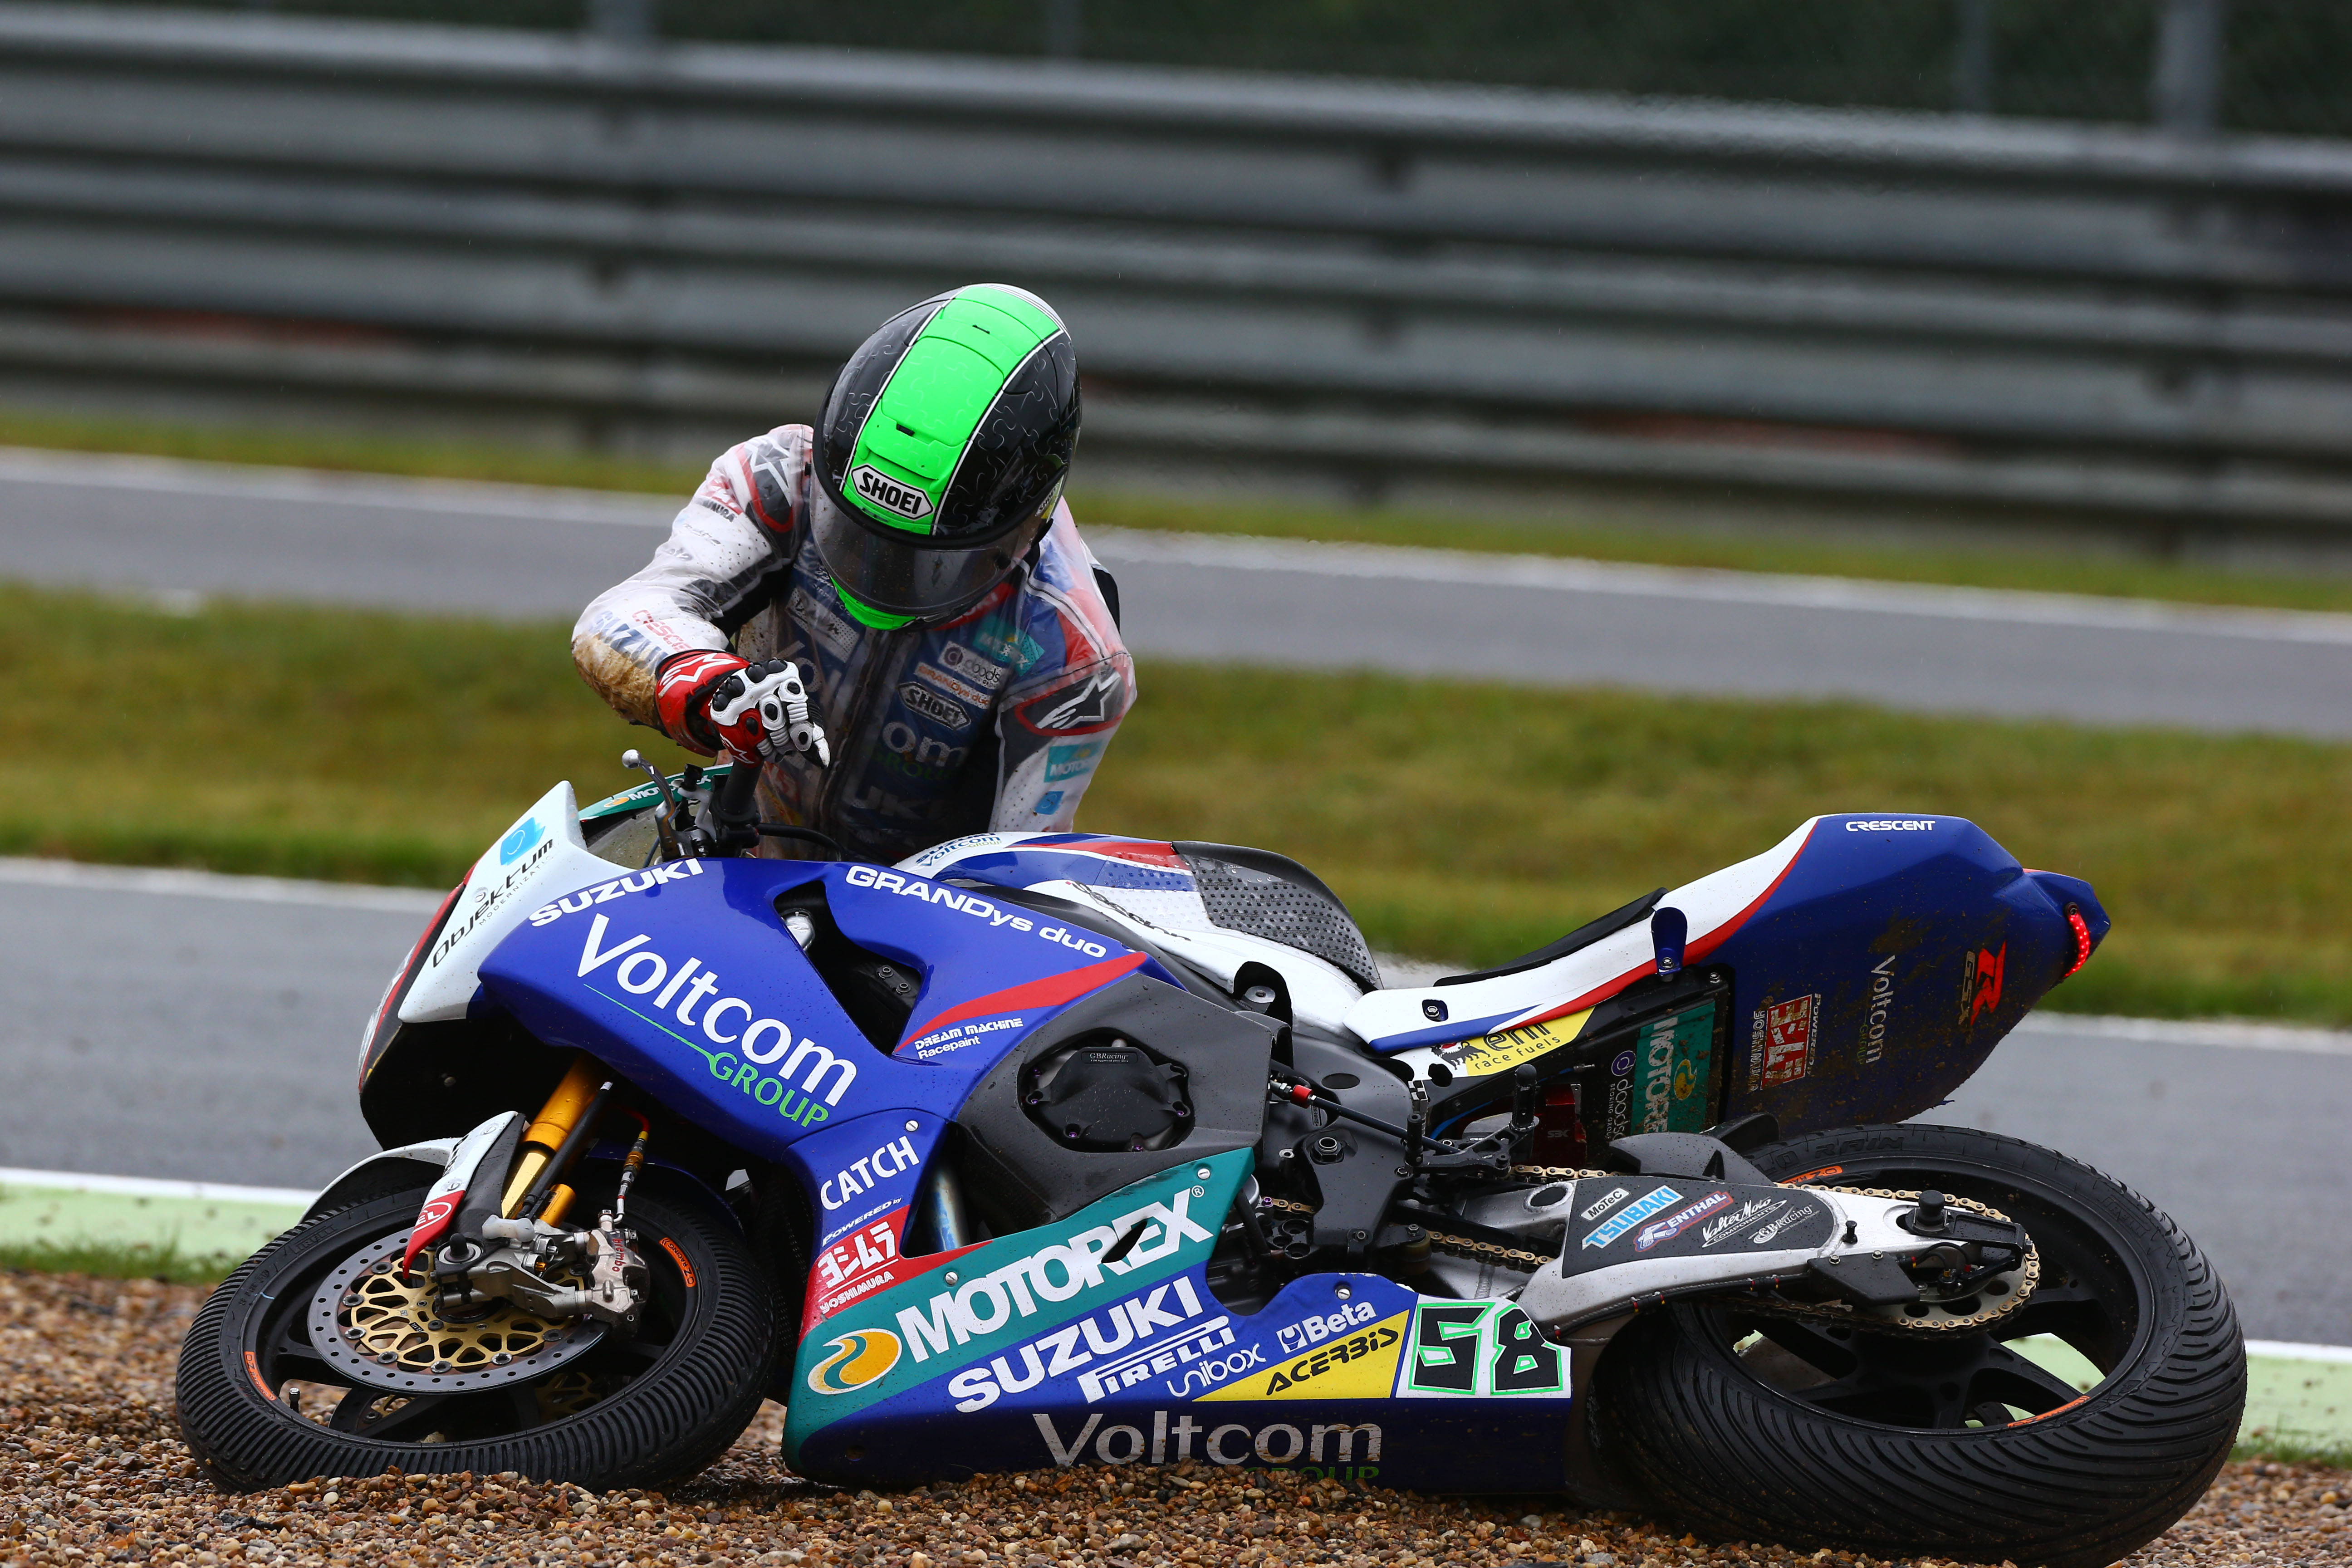 WSB 2014: Magny-Cours race 1 results